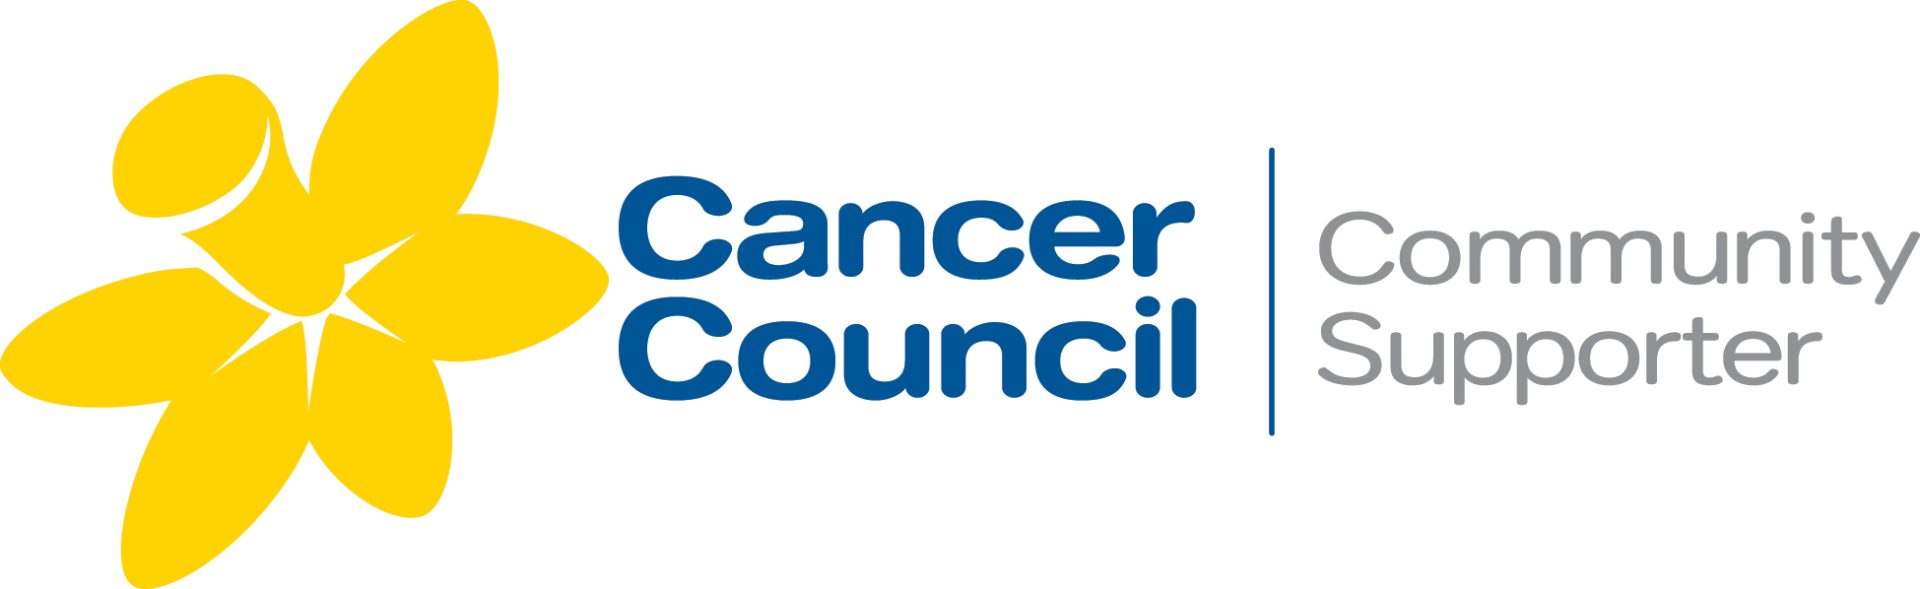 Cancer Council Australia seeks to engage all Australians in their work to reduce cancer in Australia.